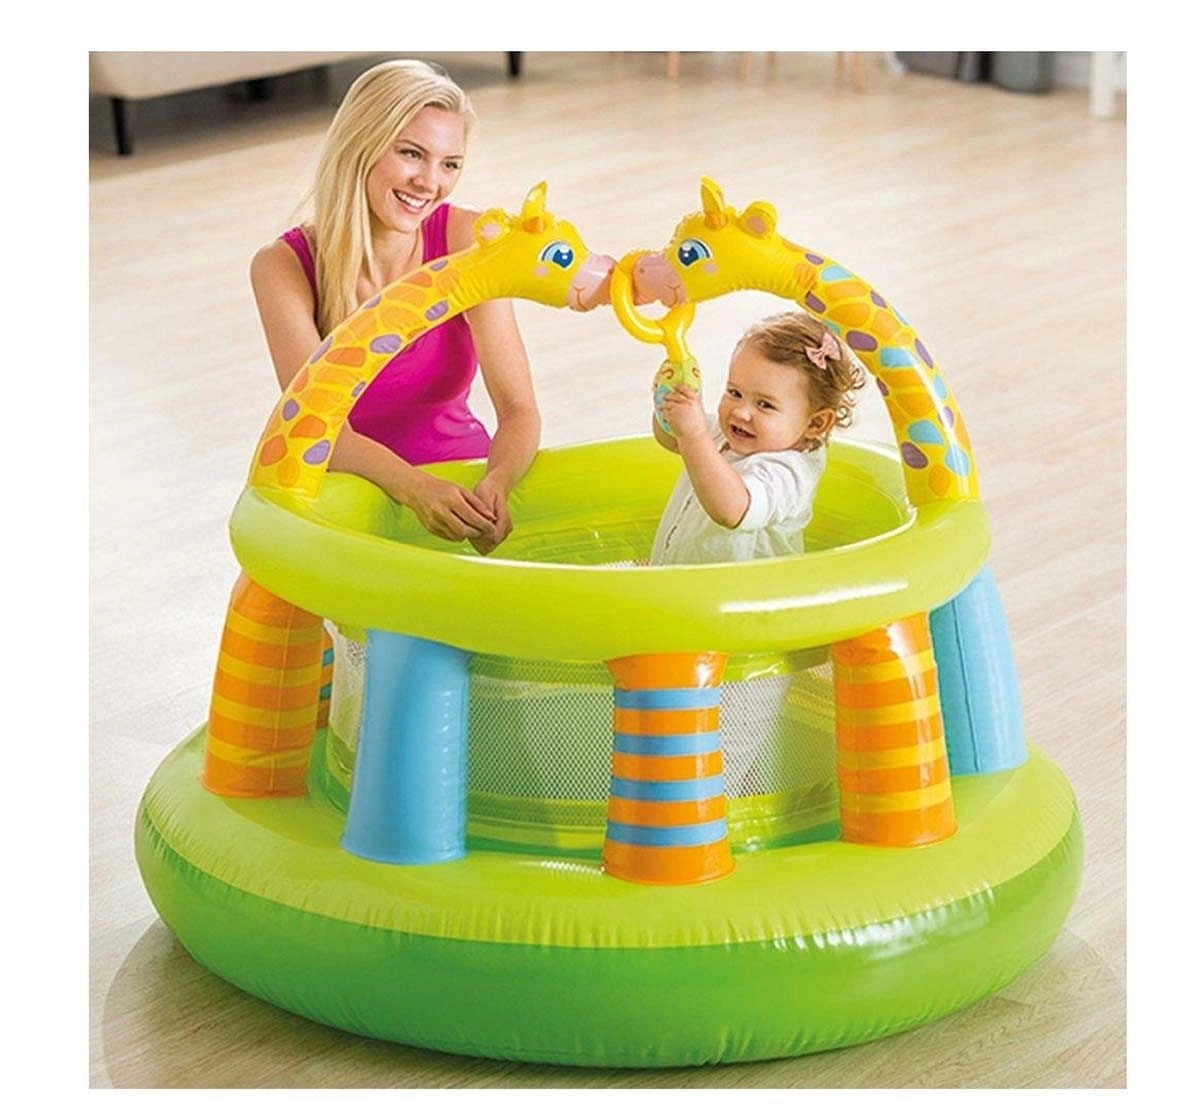 Intex Inflatable Soft Sides My First Gym Baby Gear for Kids Age 3Y+